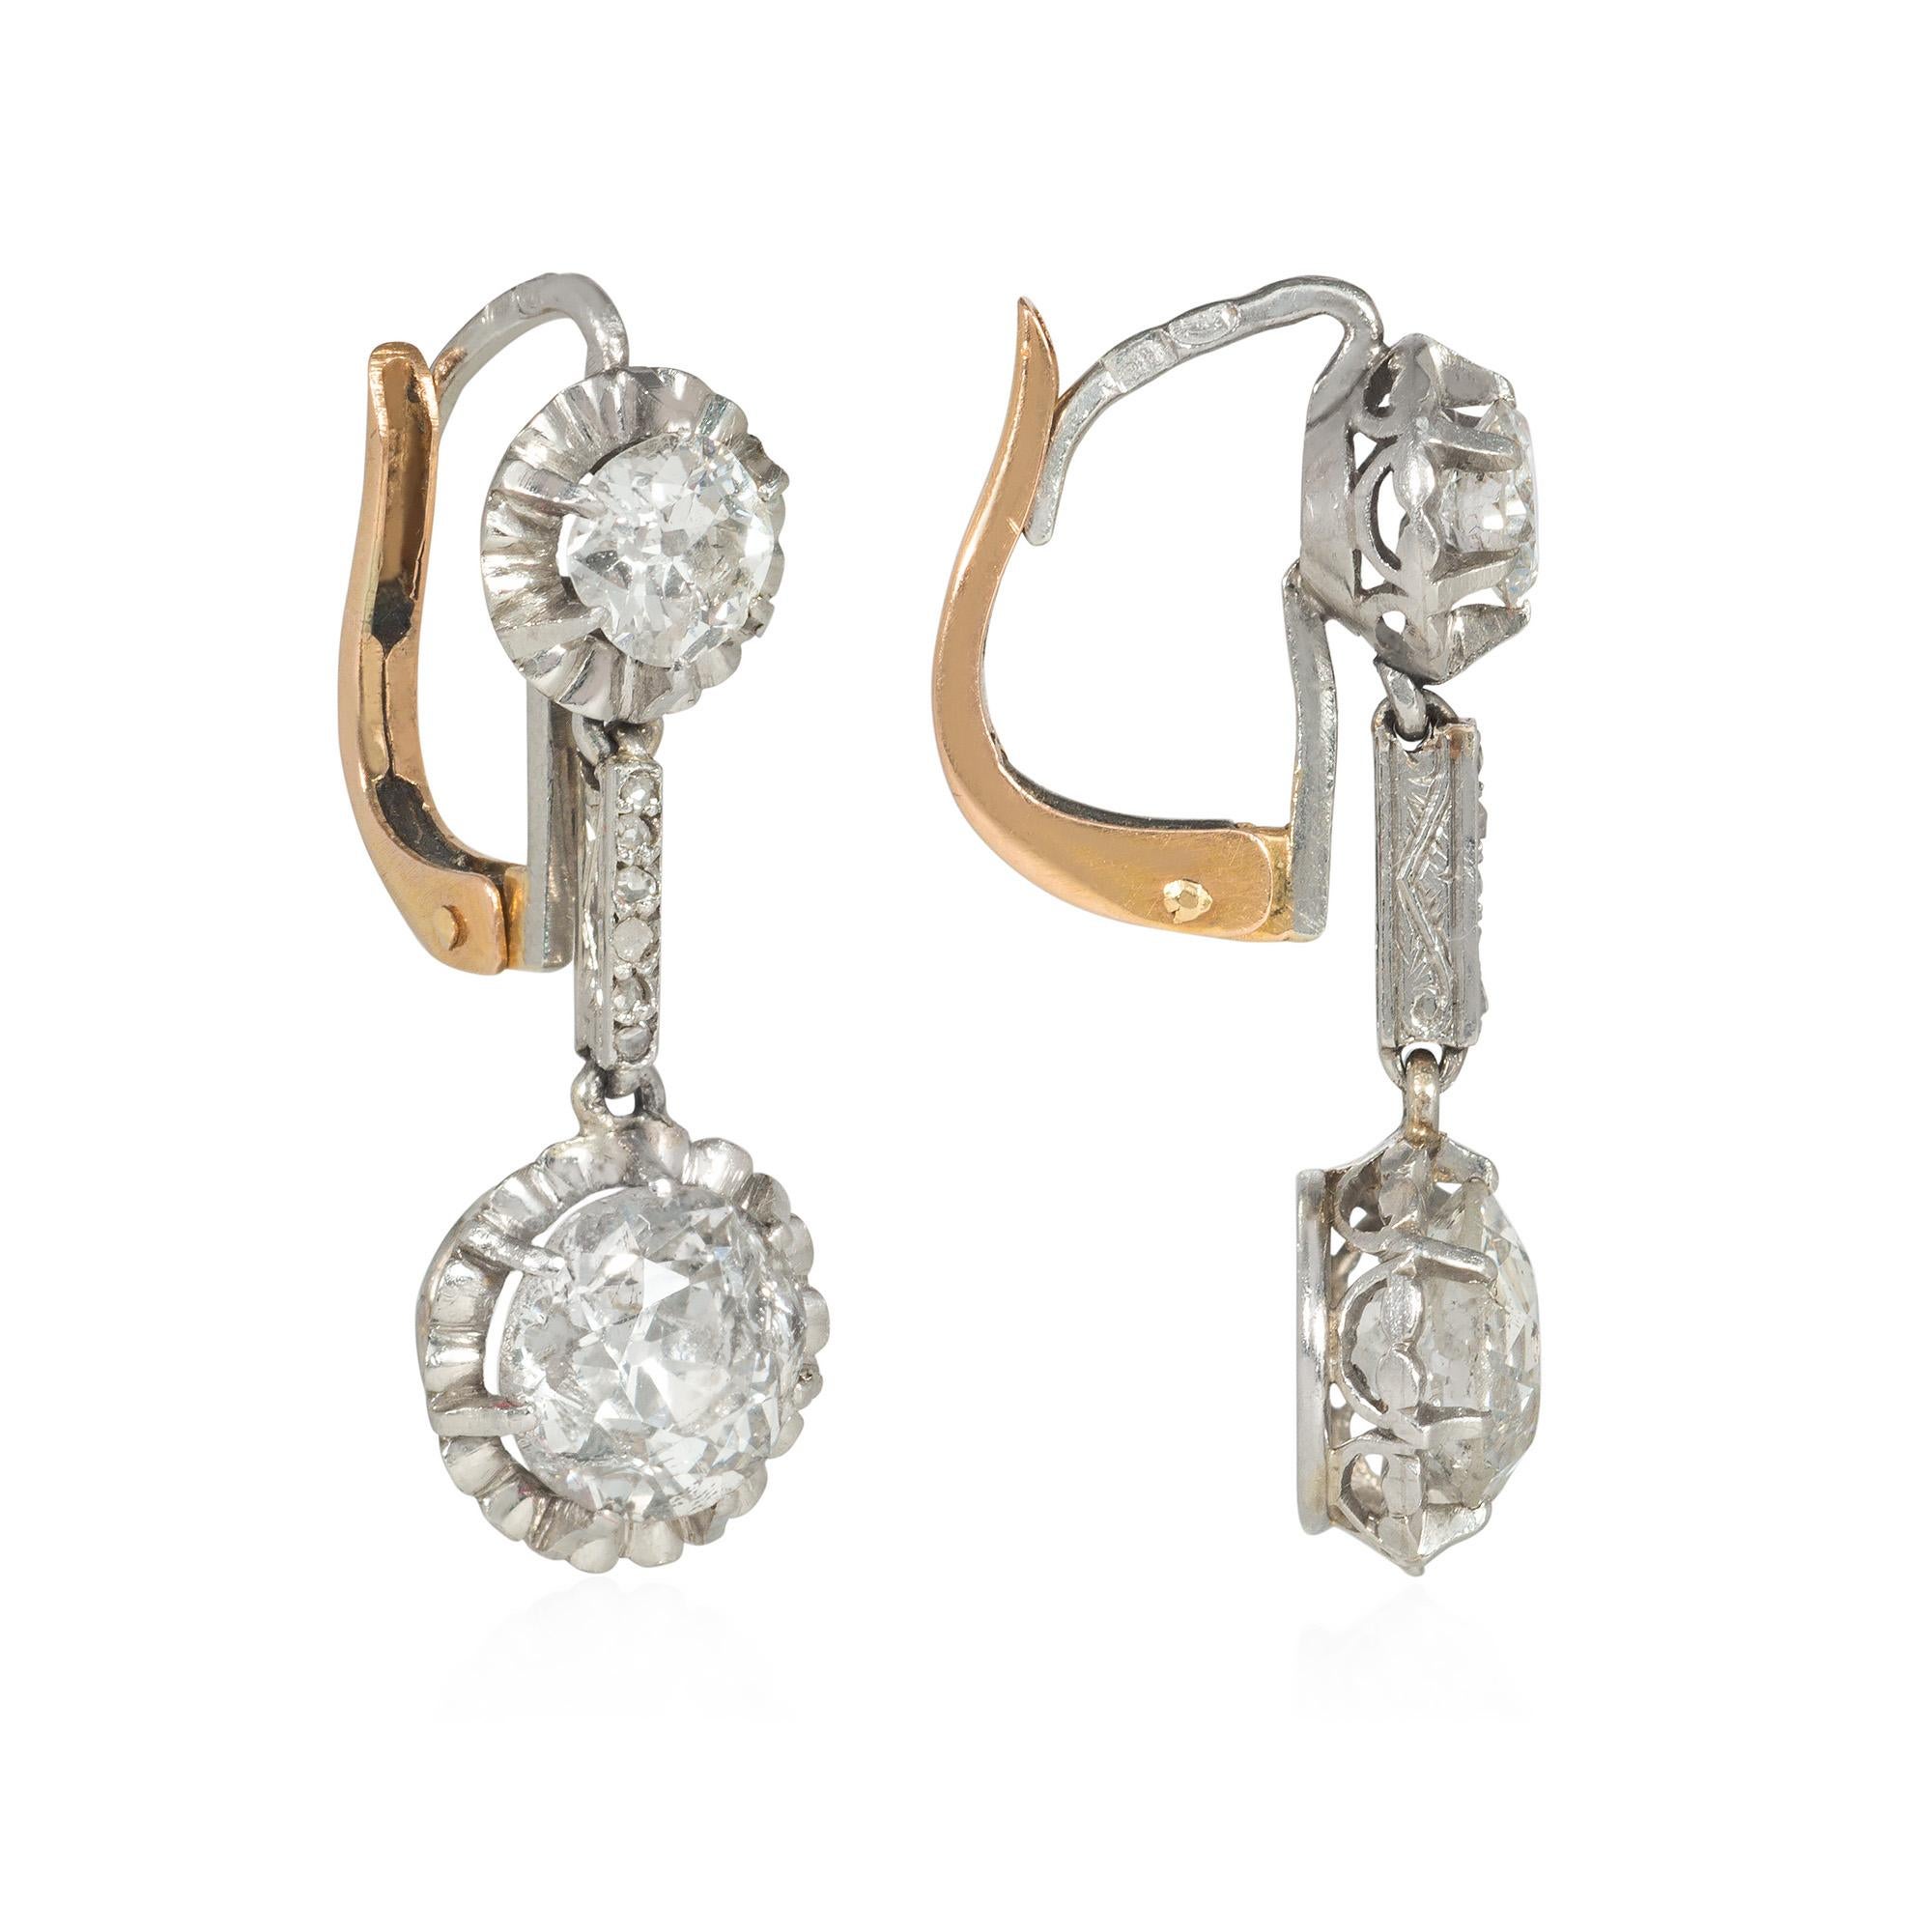 A pair of Art Deco two-stone diamond drop earrings of dormeuse style, comprised of old European-cut diamonds in ruffled settings with a bar spacer and lever back, in platinum and 18k gold. French import.  Atw diamonds 2.40 cts.; two surmounts